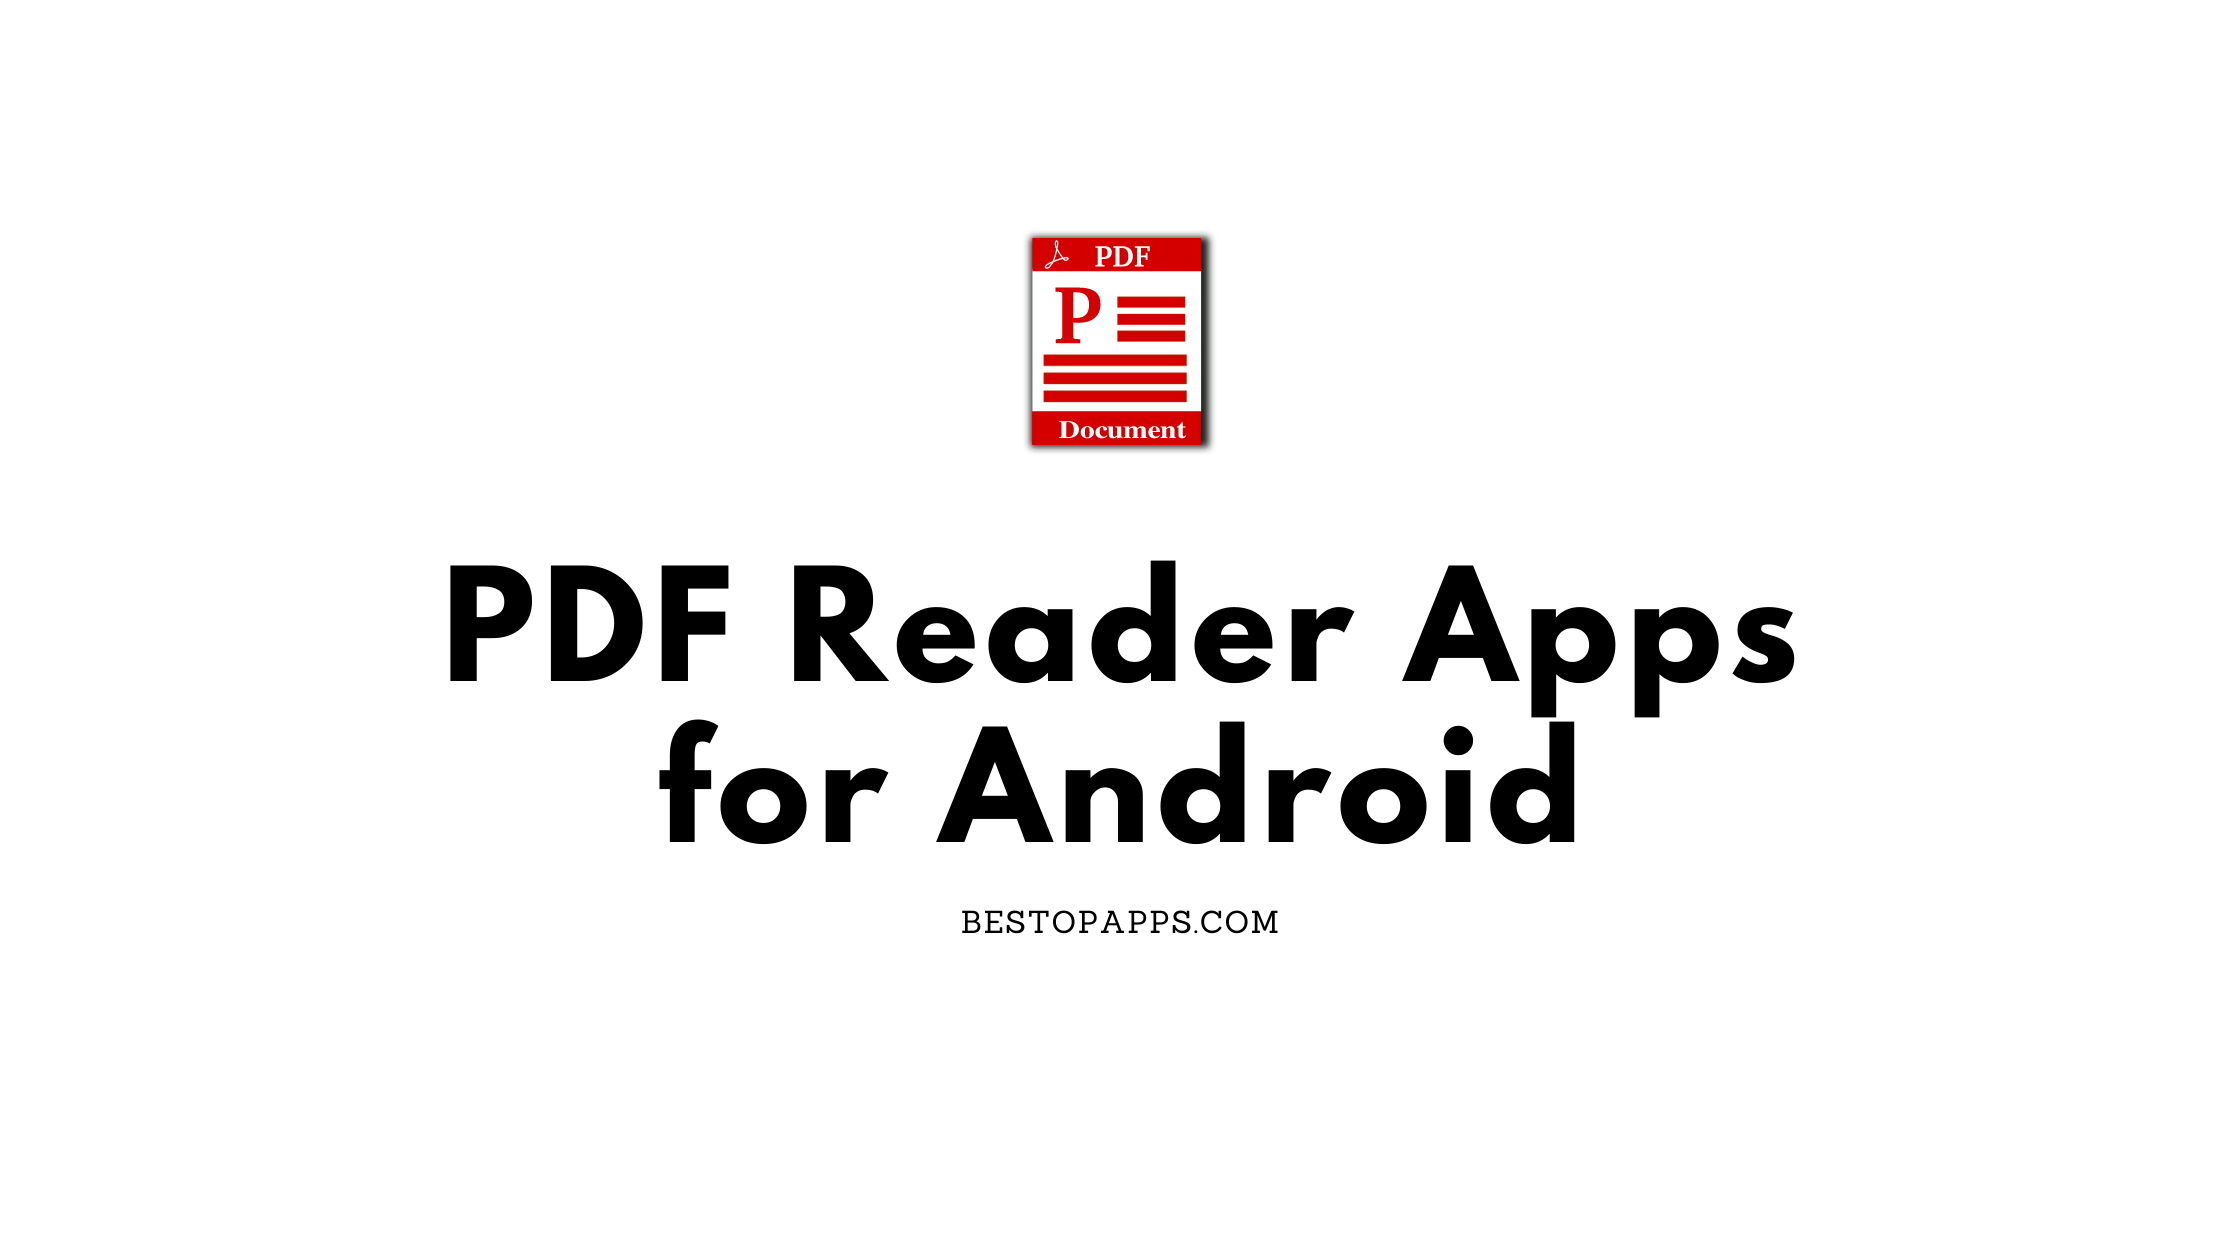 PDF Reader Apps for Android